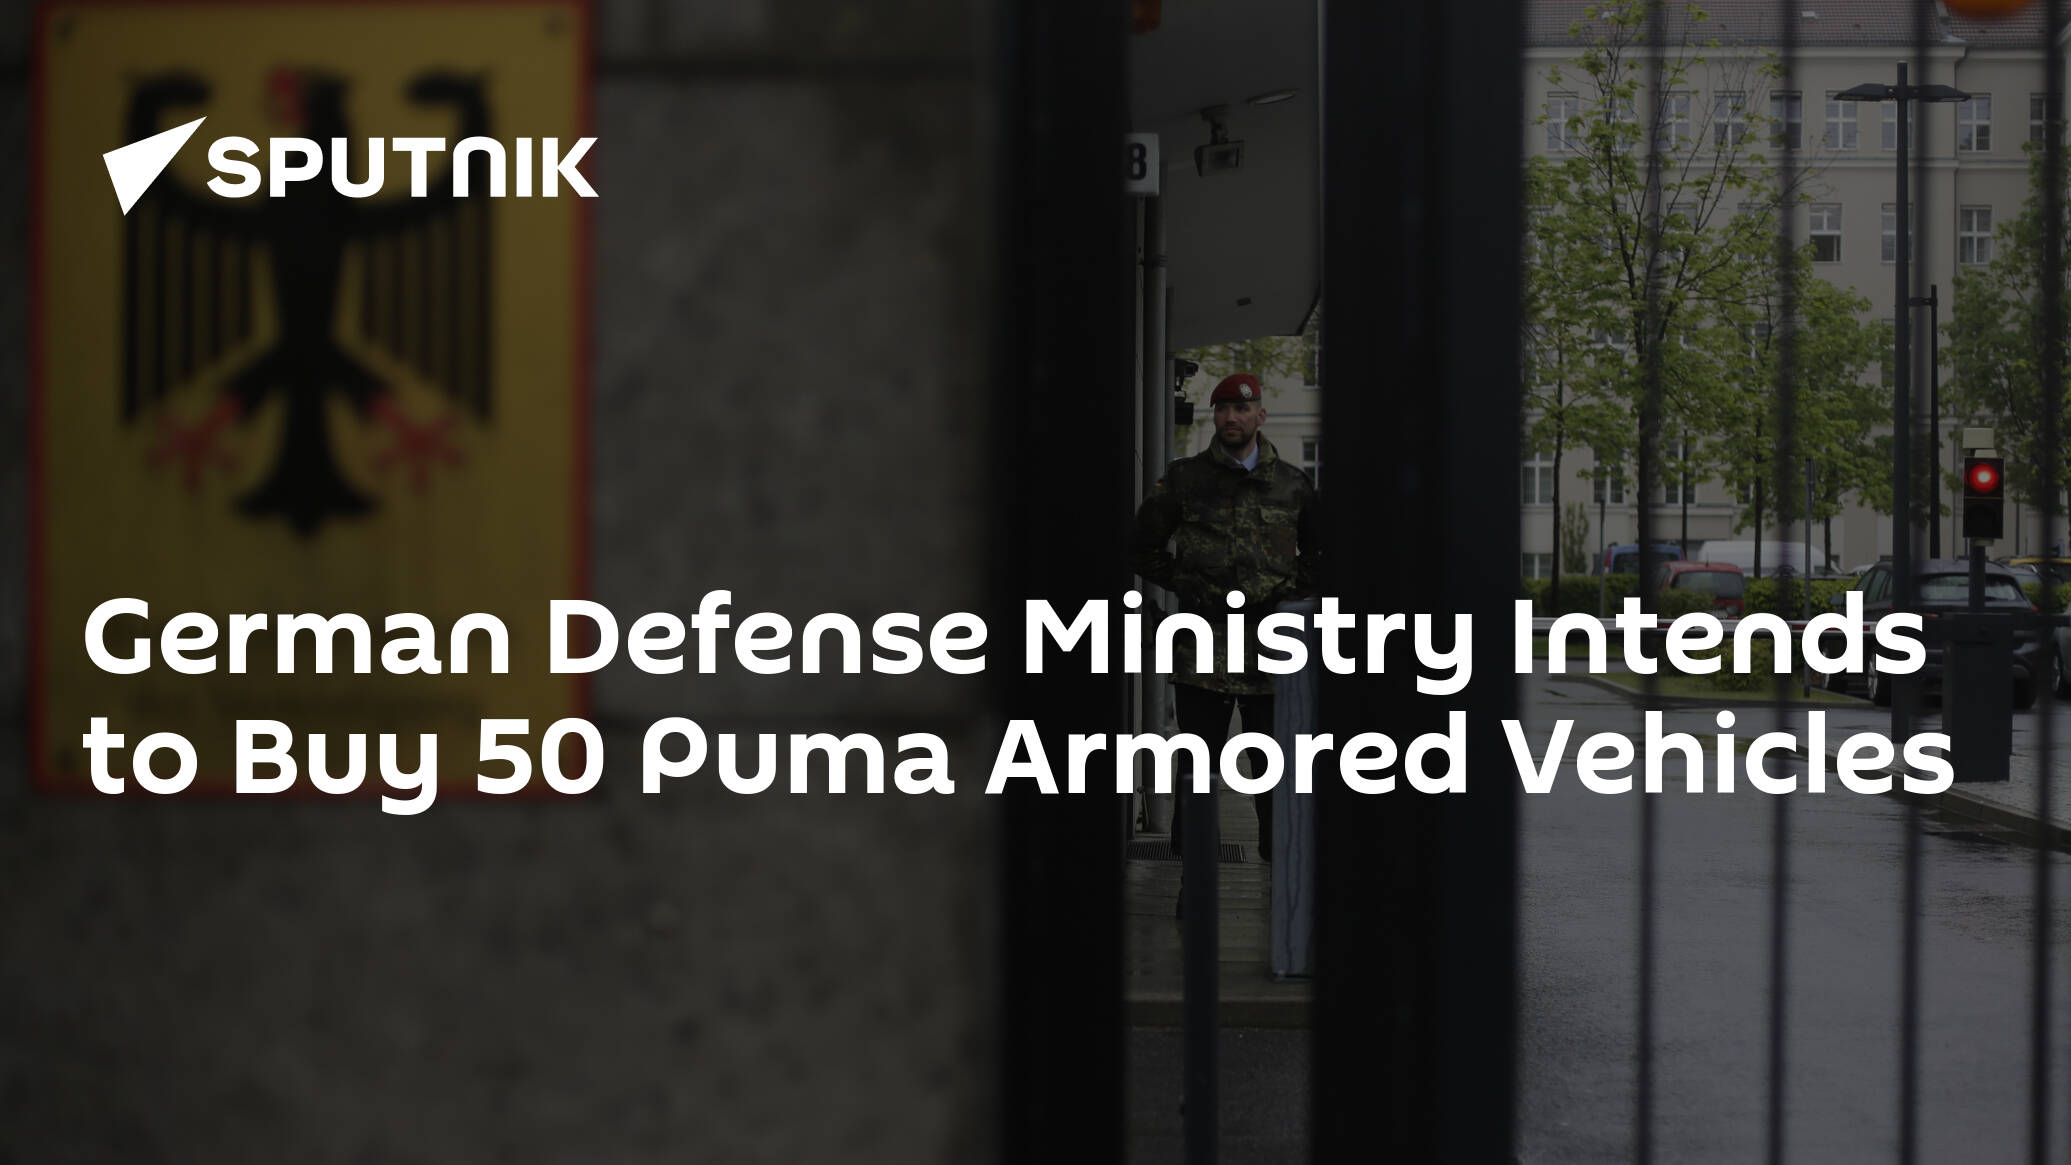 German Defense Ministry Intends to Buy 50 Puma Armored Vehicles